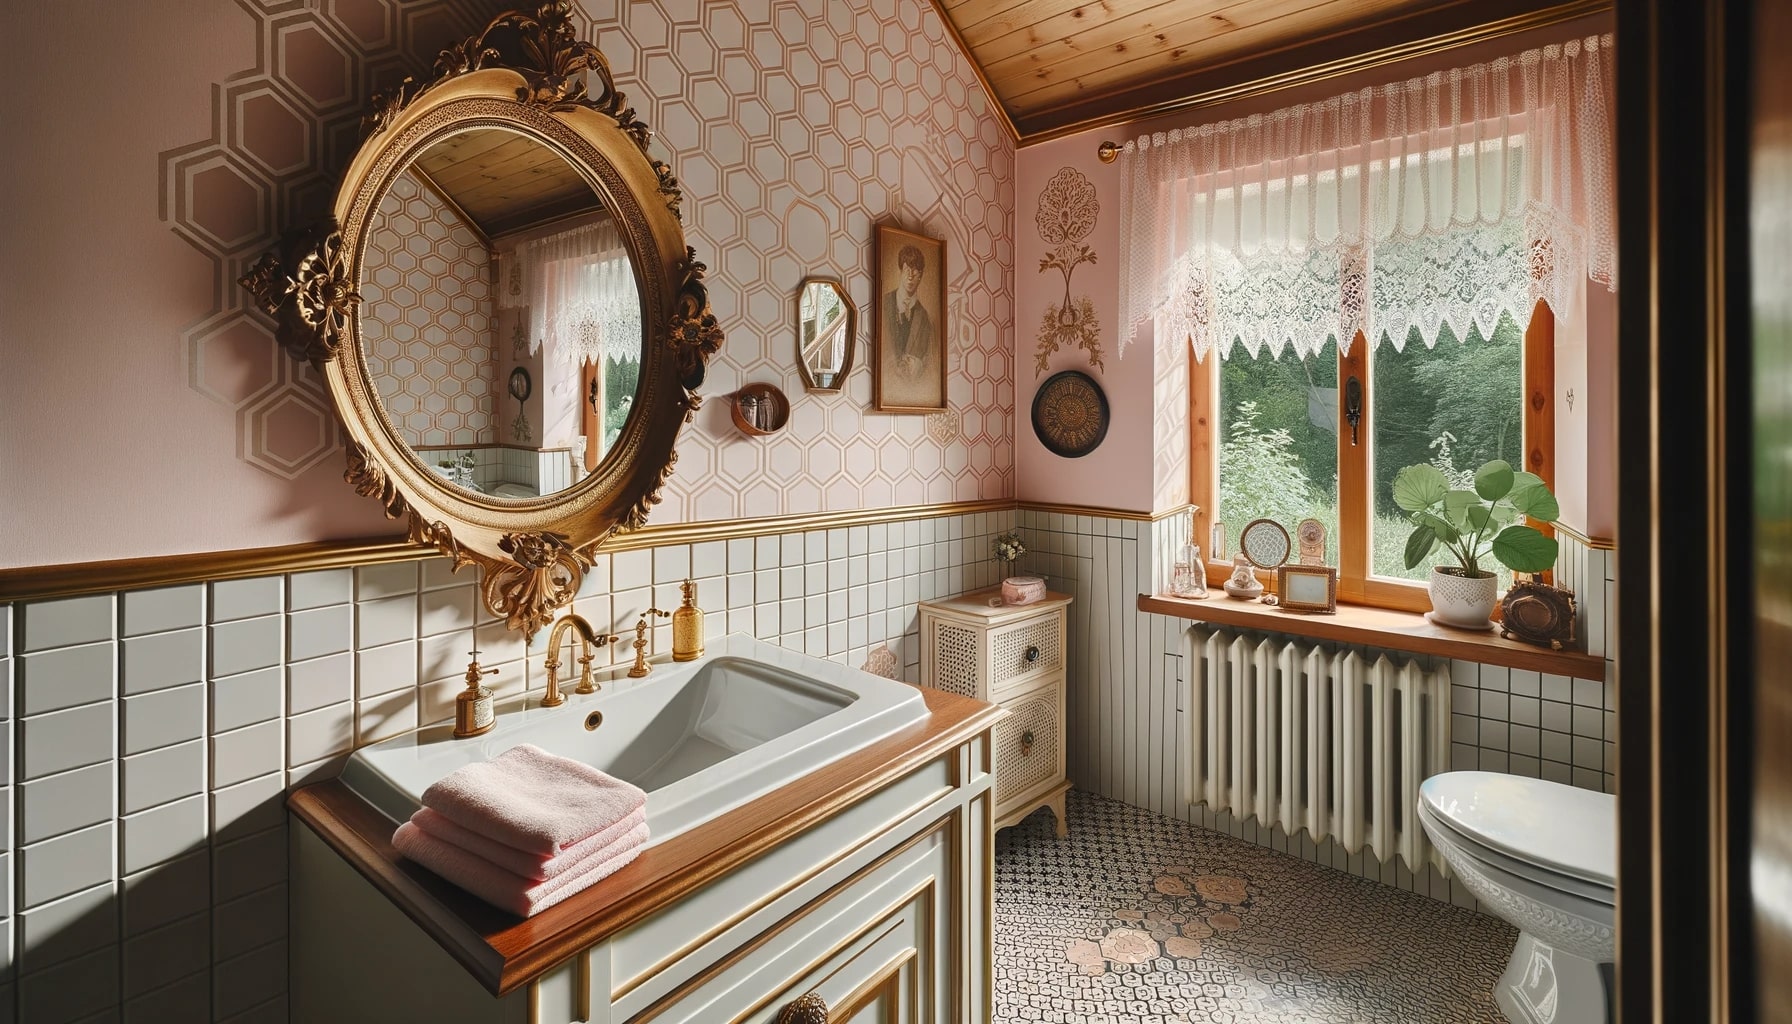 Photo of a 60s-inspired bathroom in a cozy cottage setting, featuring soft pink walls, geometric patterned wallpaper, hexagonal floor tiles, and wooden accents. A gilded ornate mirror hangs above a porcelain sink, and lace curtains frame a window overlooking a garden.